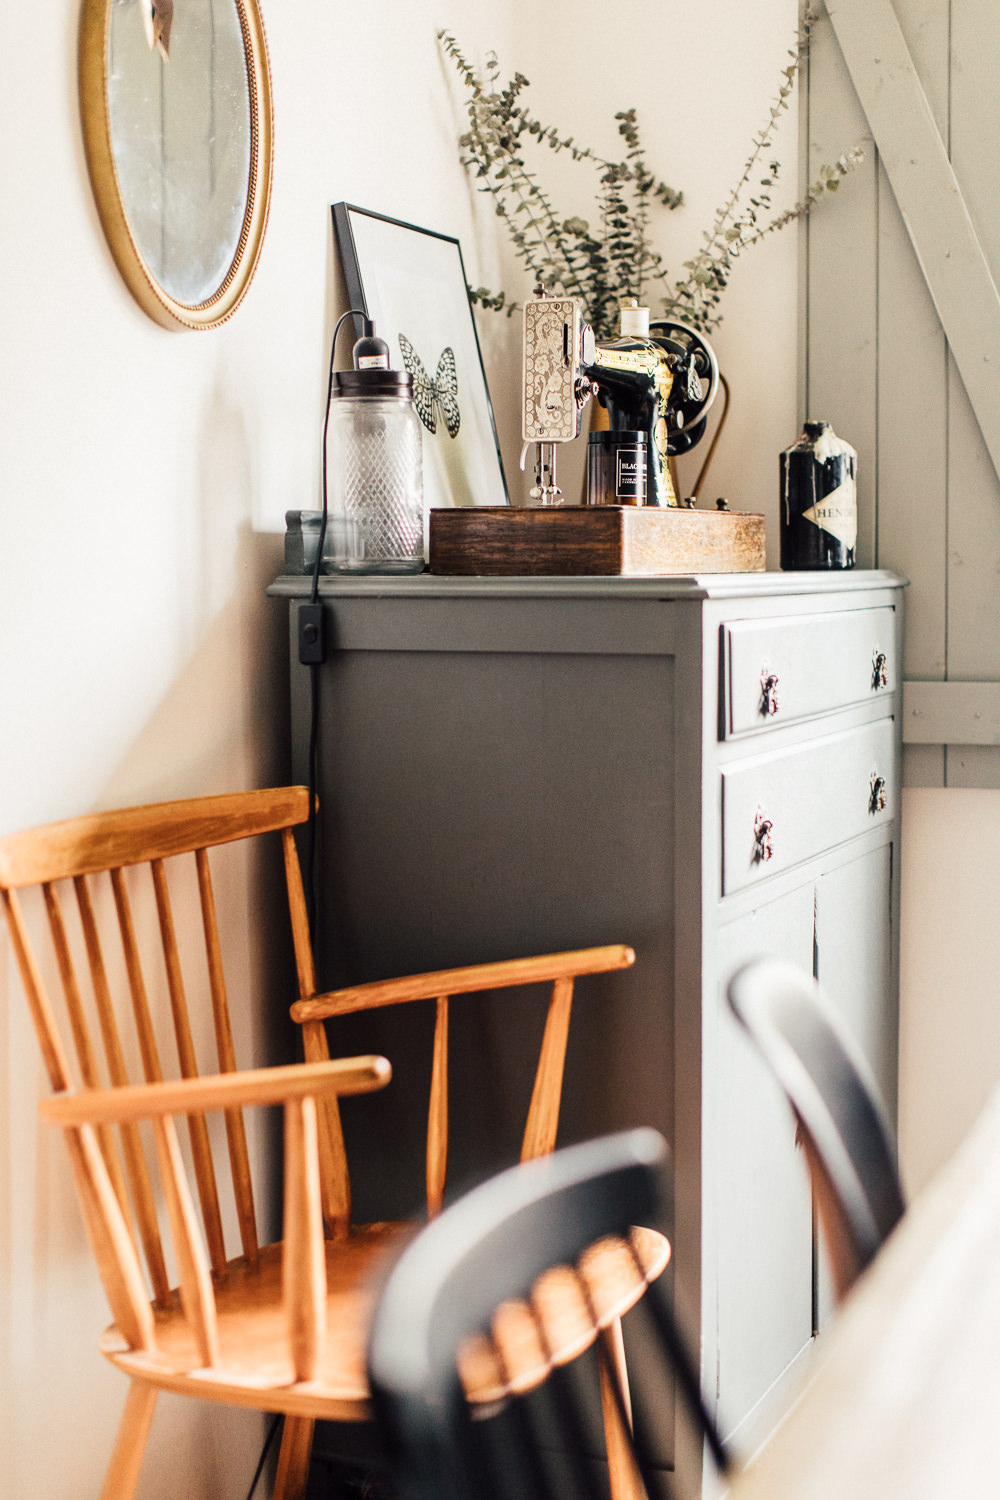 Rented Property Dining Room with shutters and vintage finds